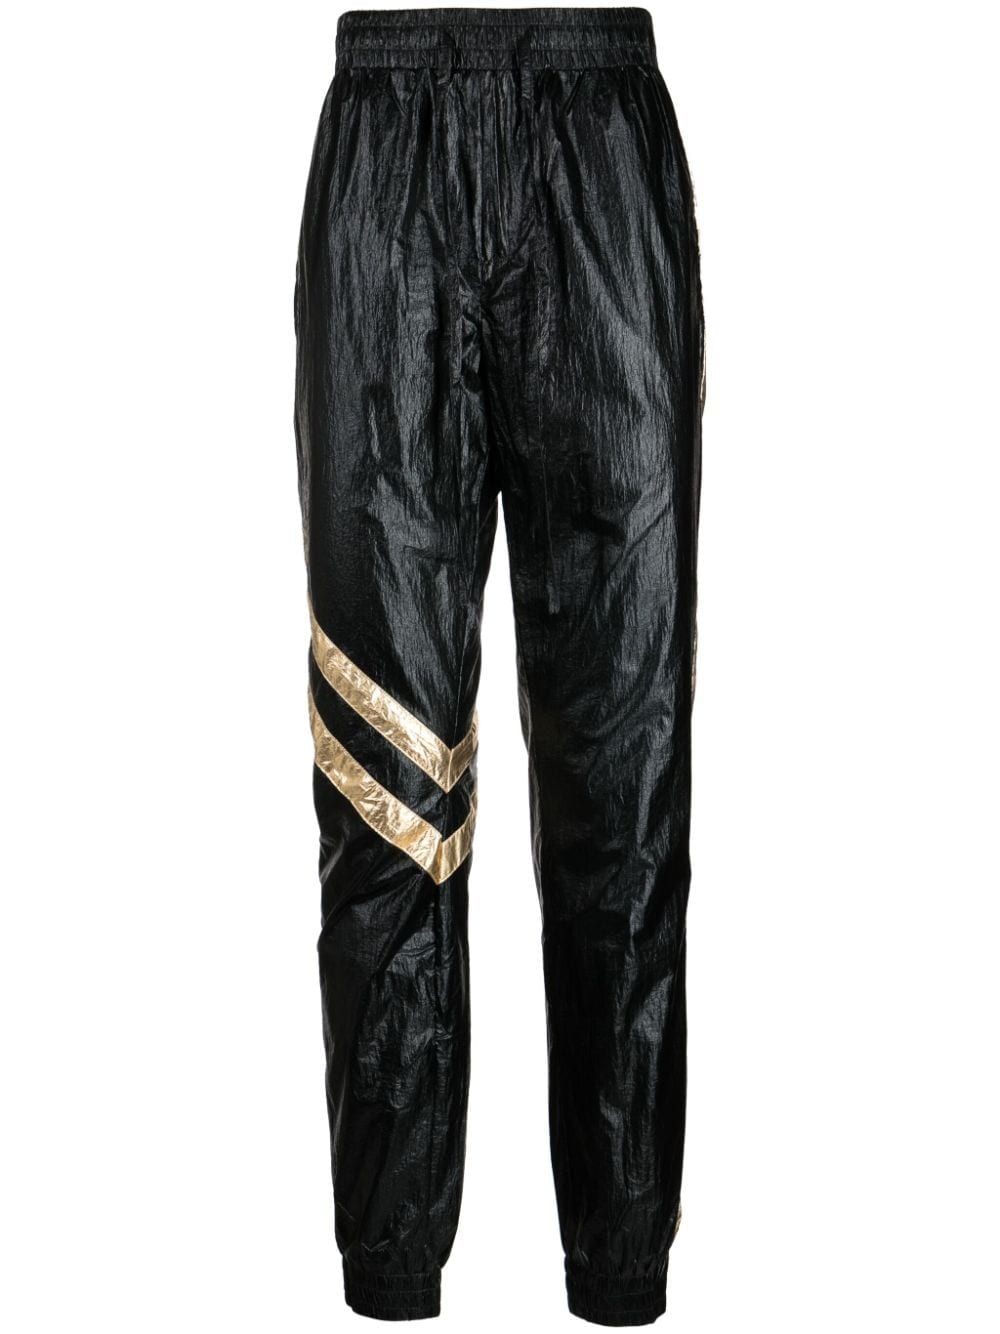 Image 2 of God's Masterful Children Astro trousers